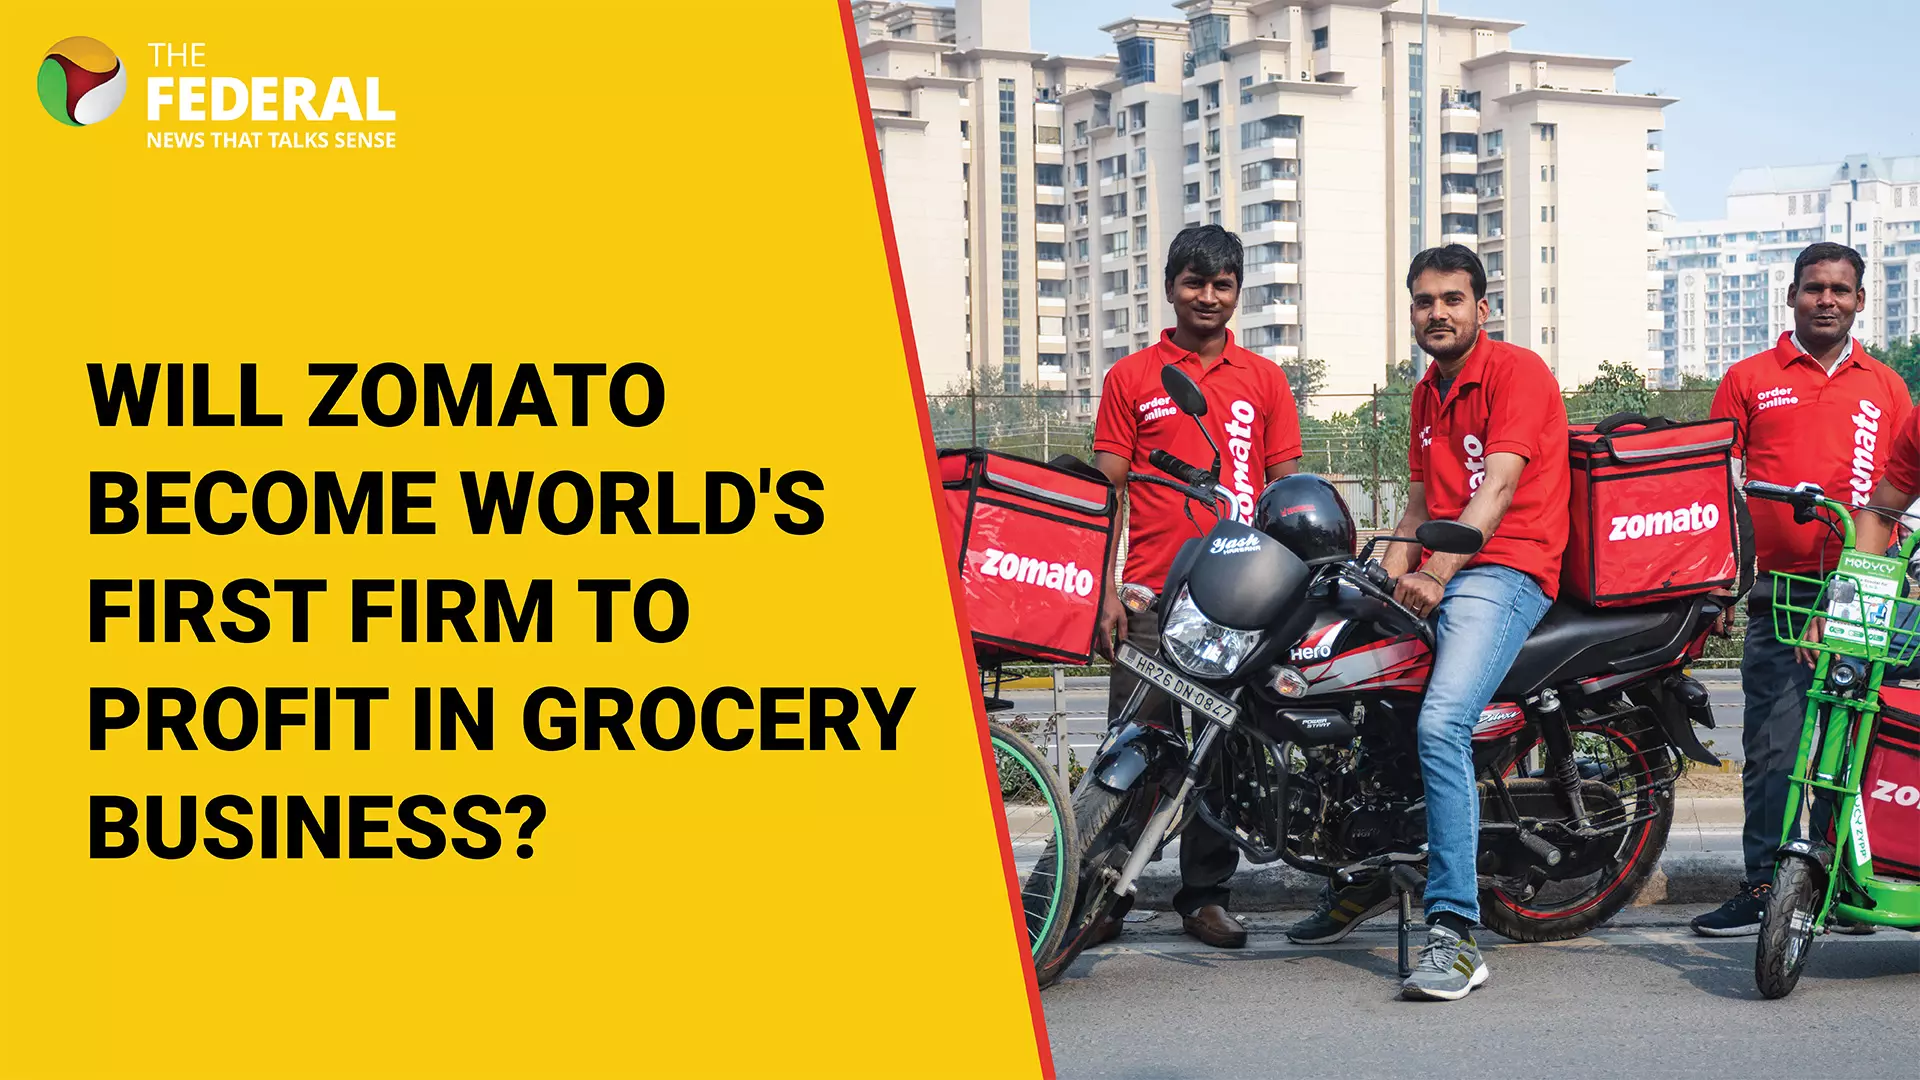 Will Zomato become worlds first firm to profit in grocery business?